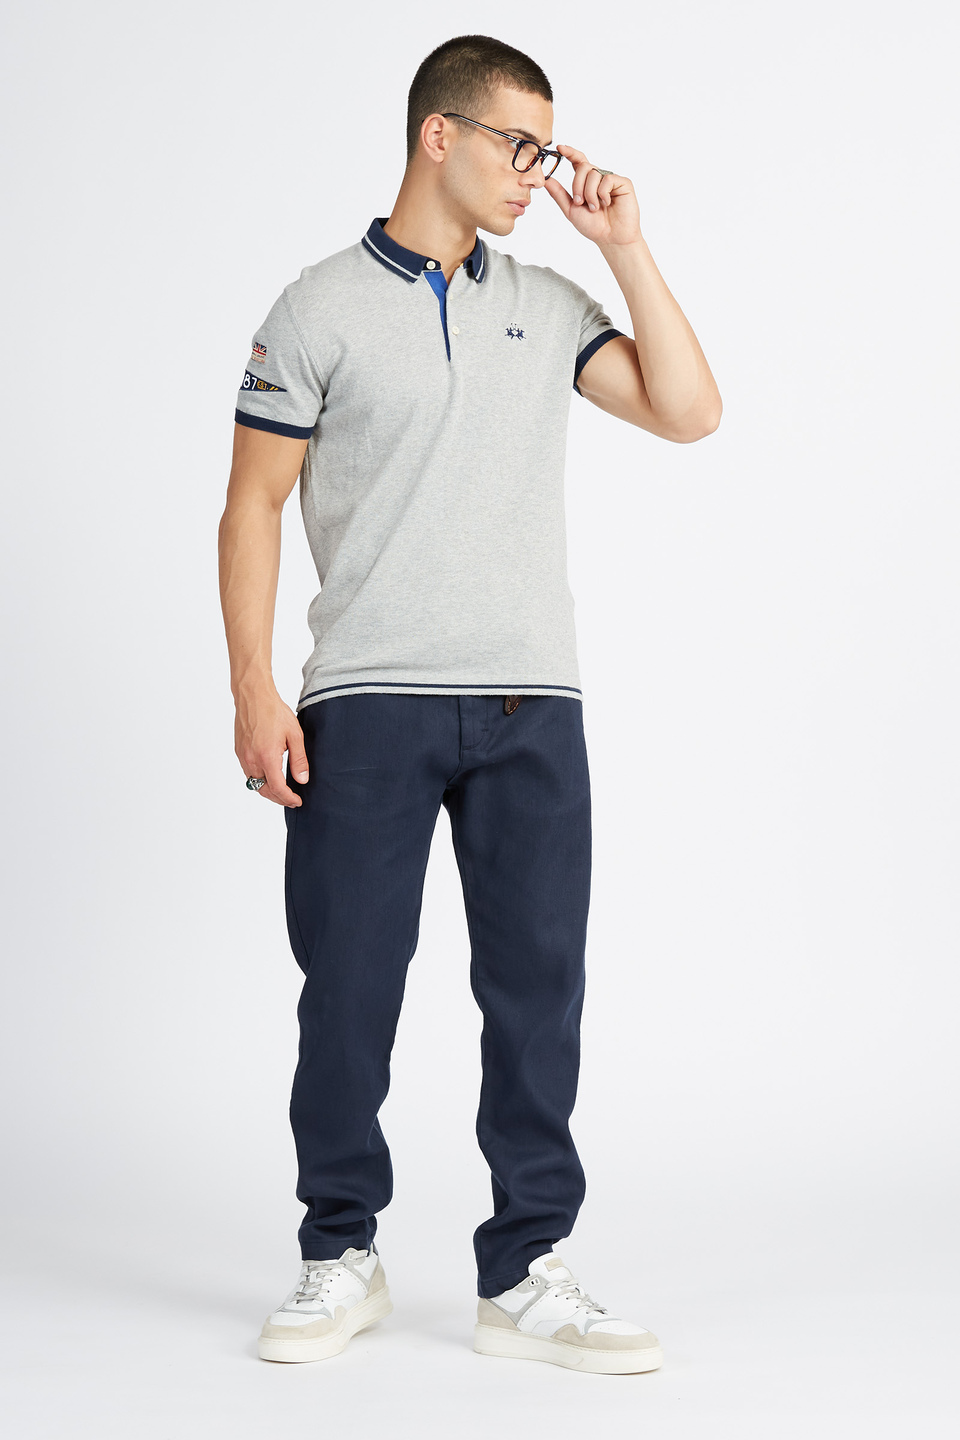 Short-sleeved men's tricot sweater in solid color Polo Academy - Victorin | La Martina - Official Online Shop